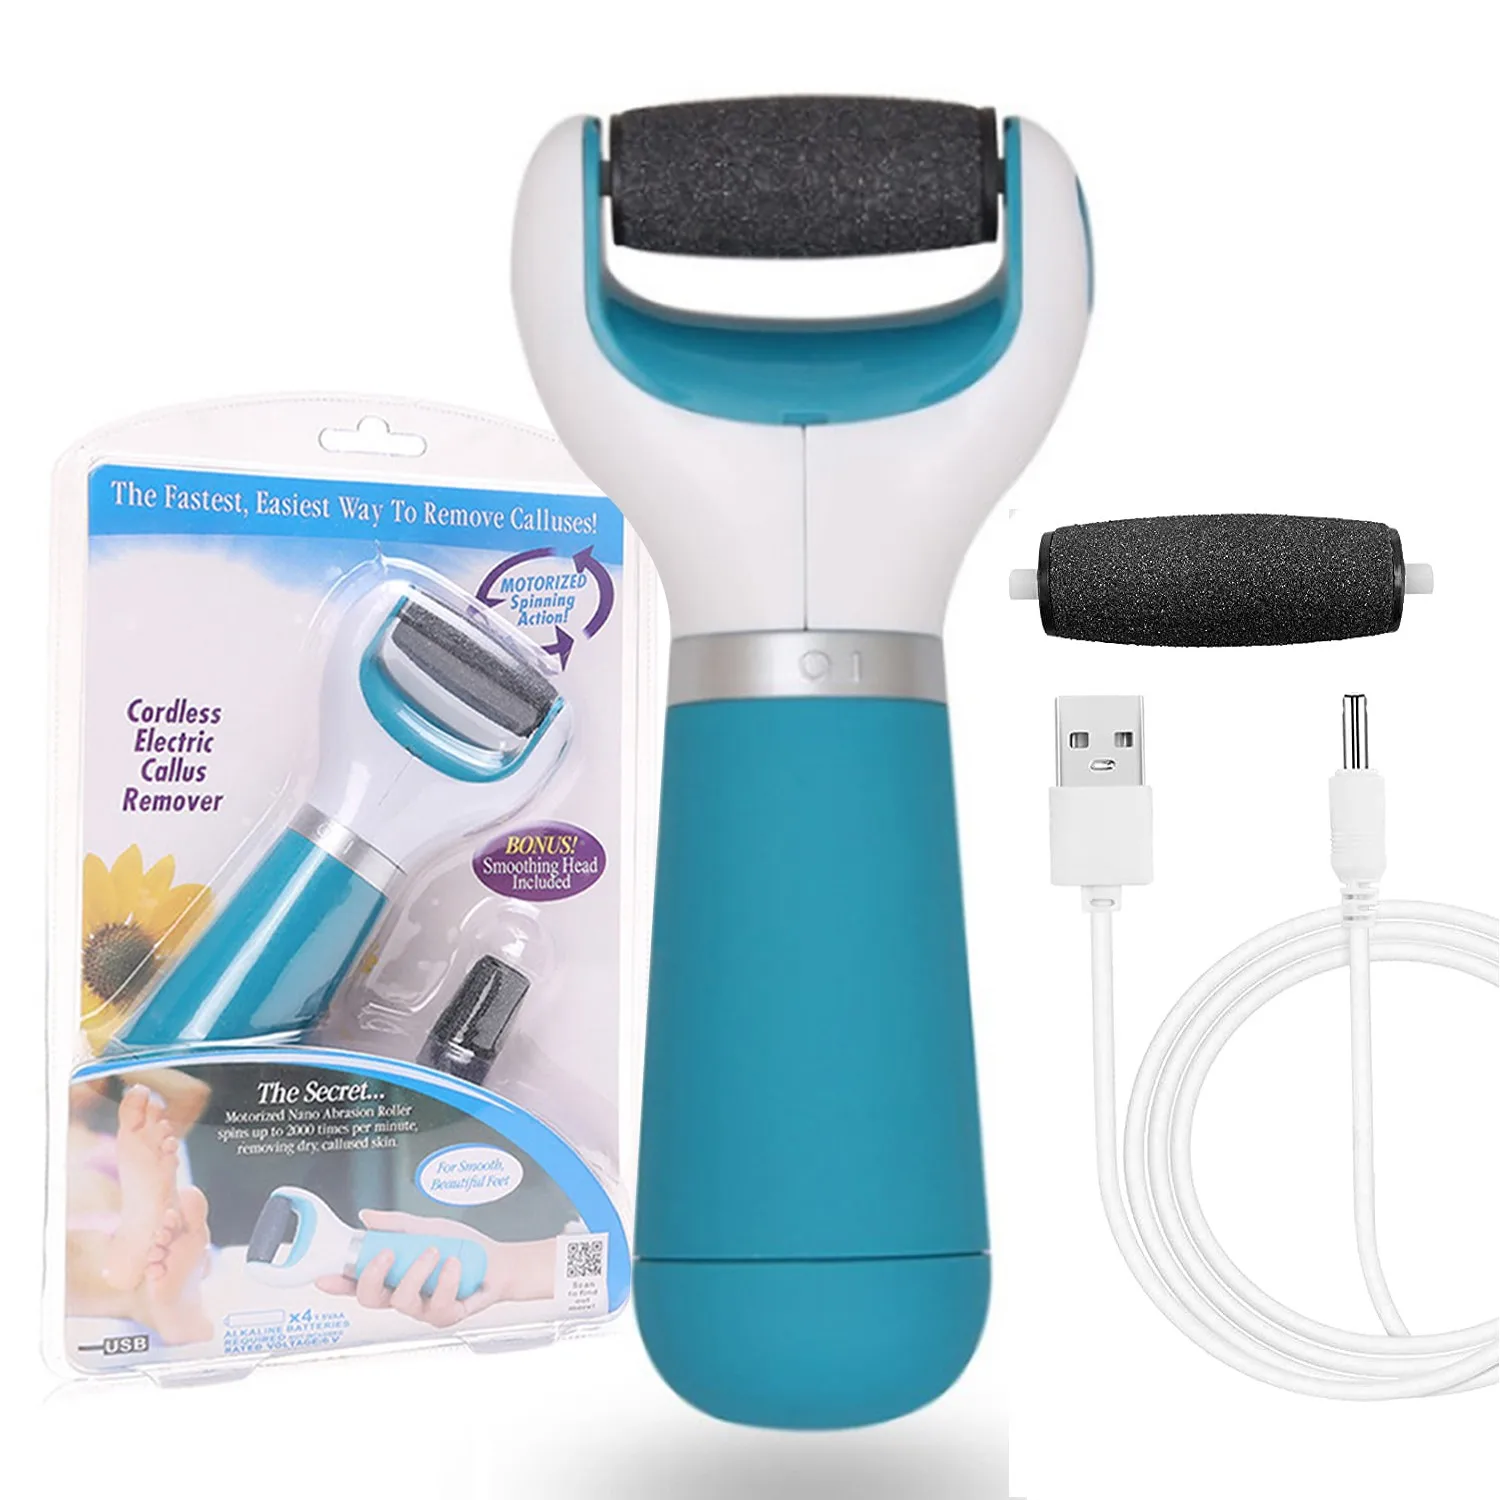 Foot Care Tool Electric Foot File Foot Callouses Dead Skin Remover Shaver Remove Dry Dead Hard Cracked Skin Safe and Painless